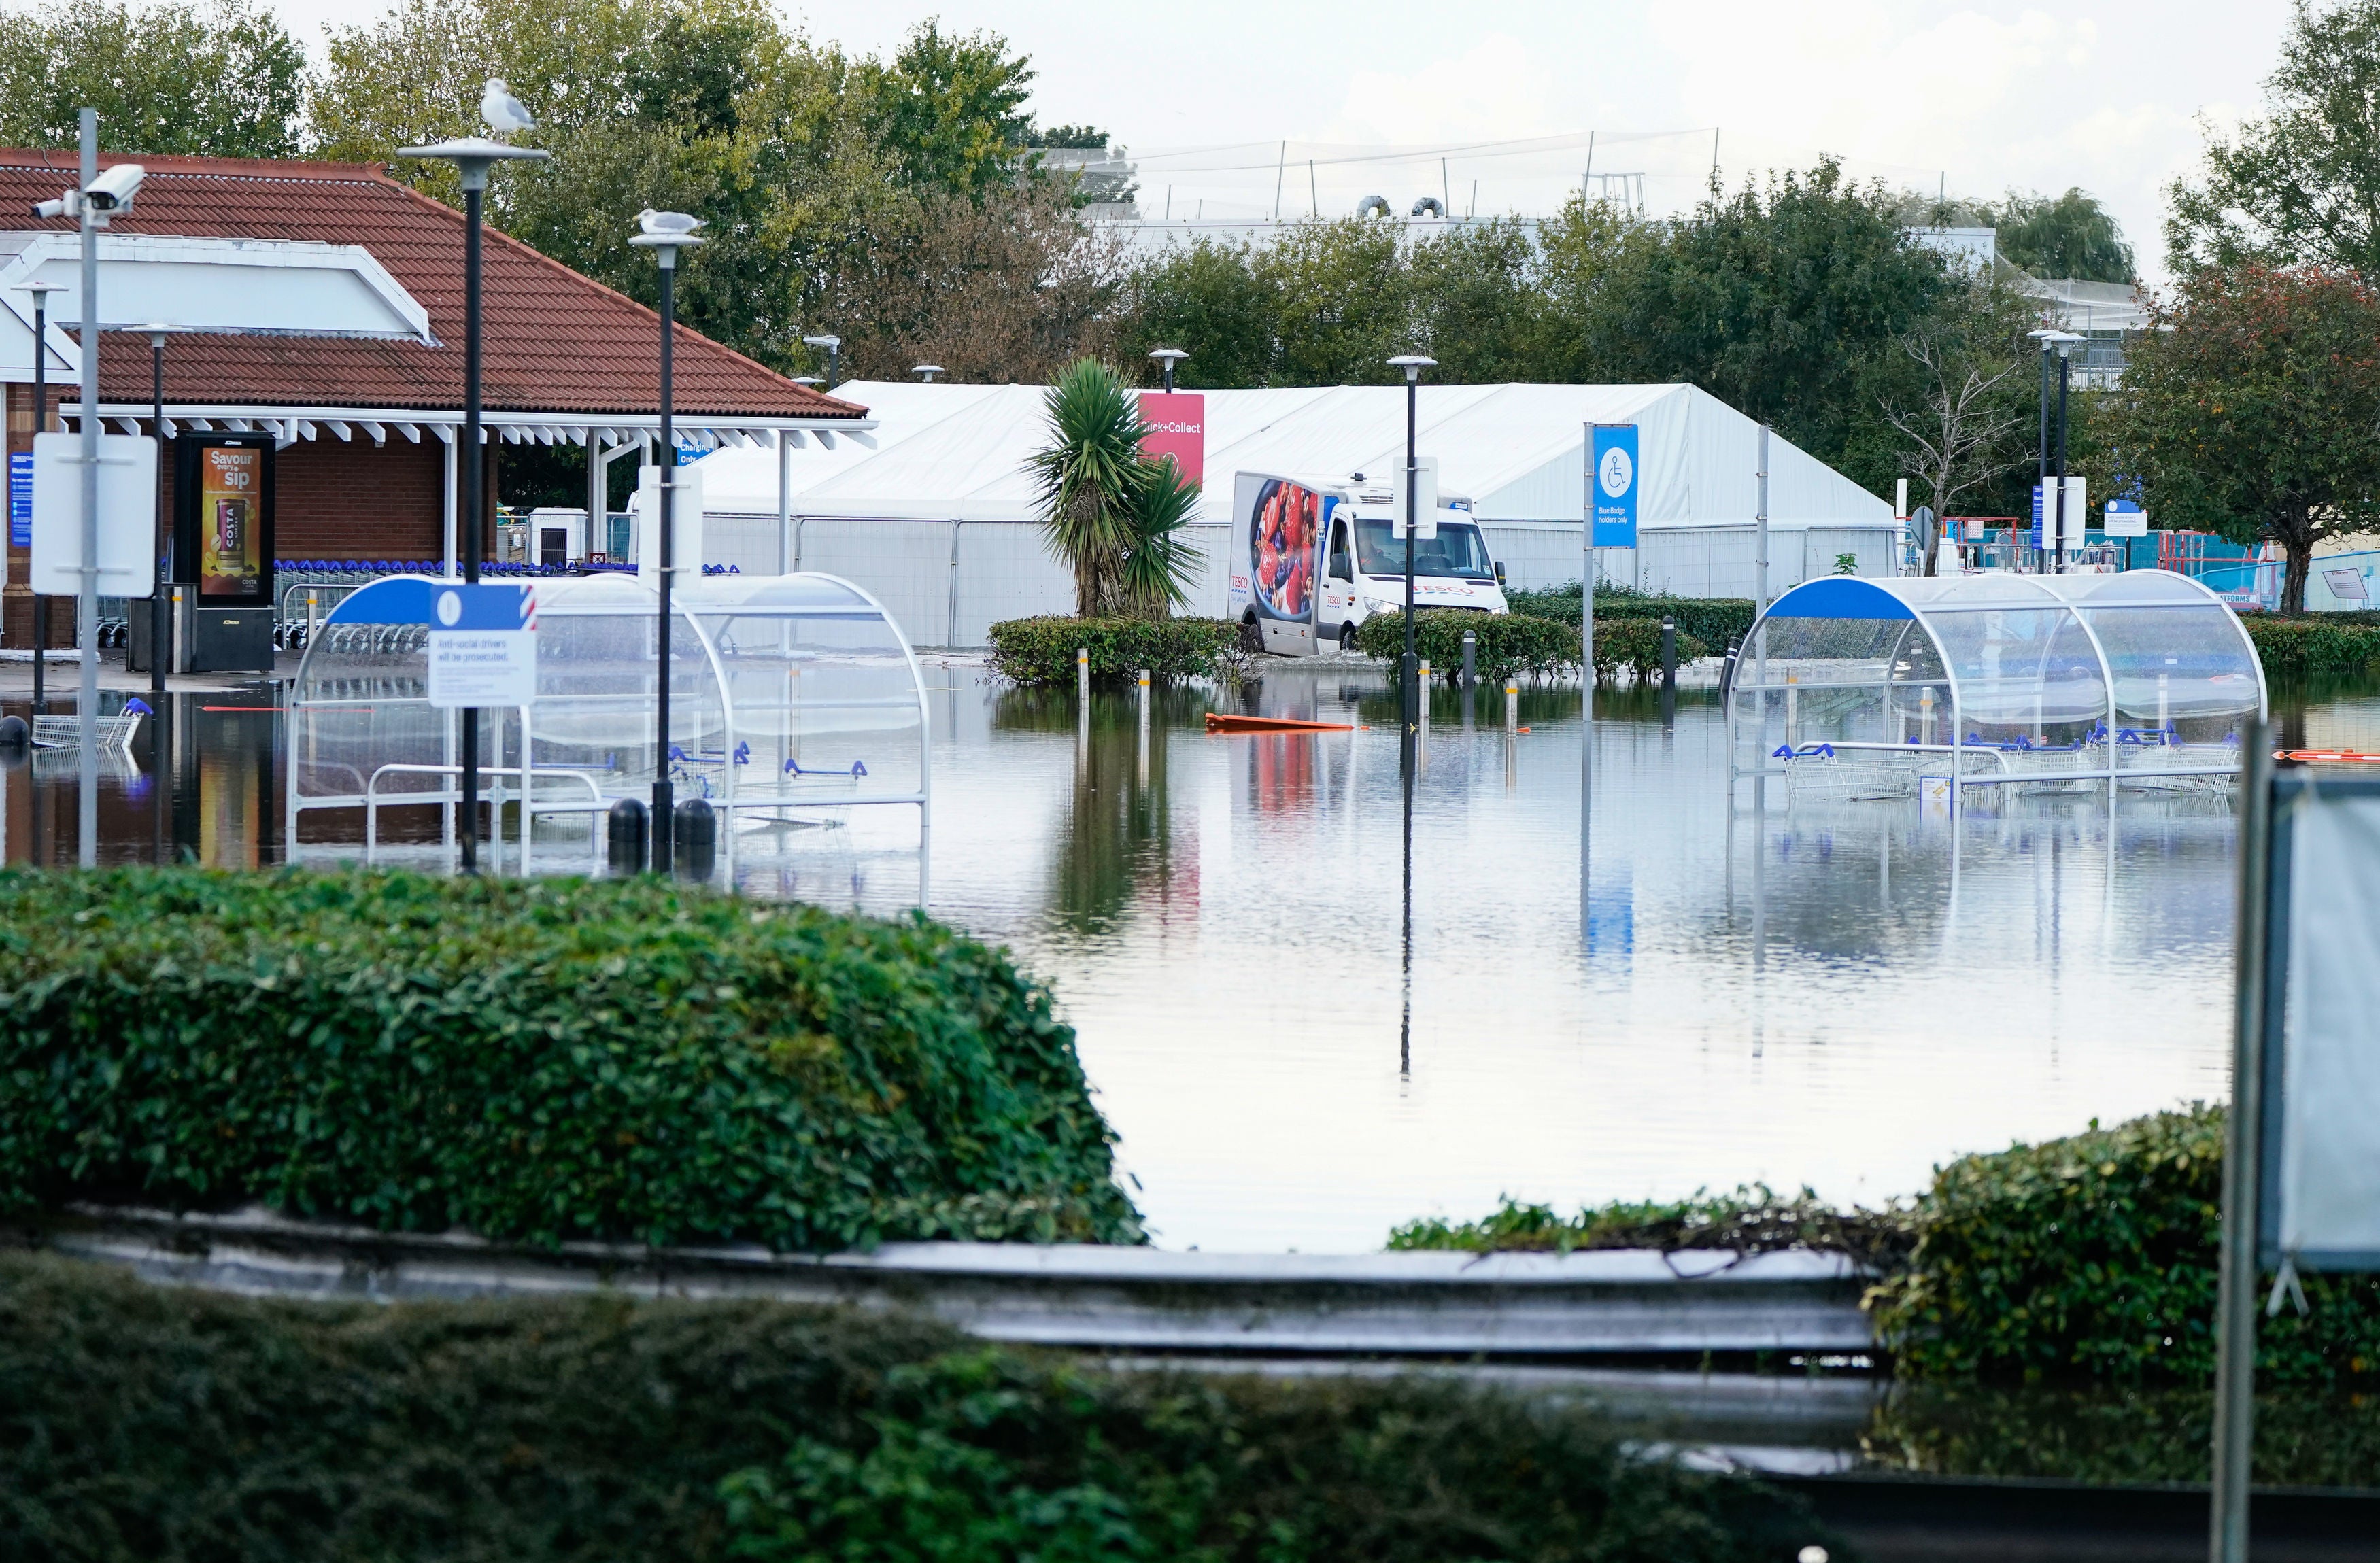 <p>A view of the flooded car park at a Tesco store in Bognor Regis after heavy rain the area. </p>